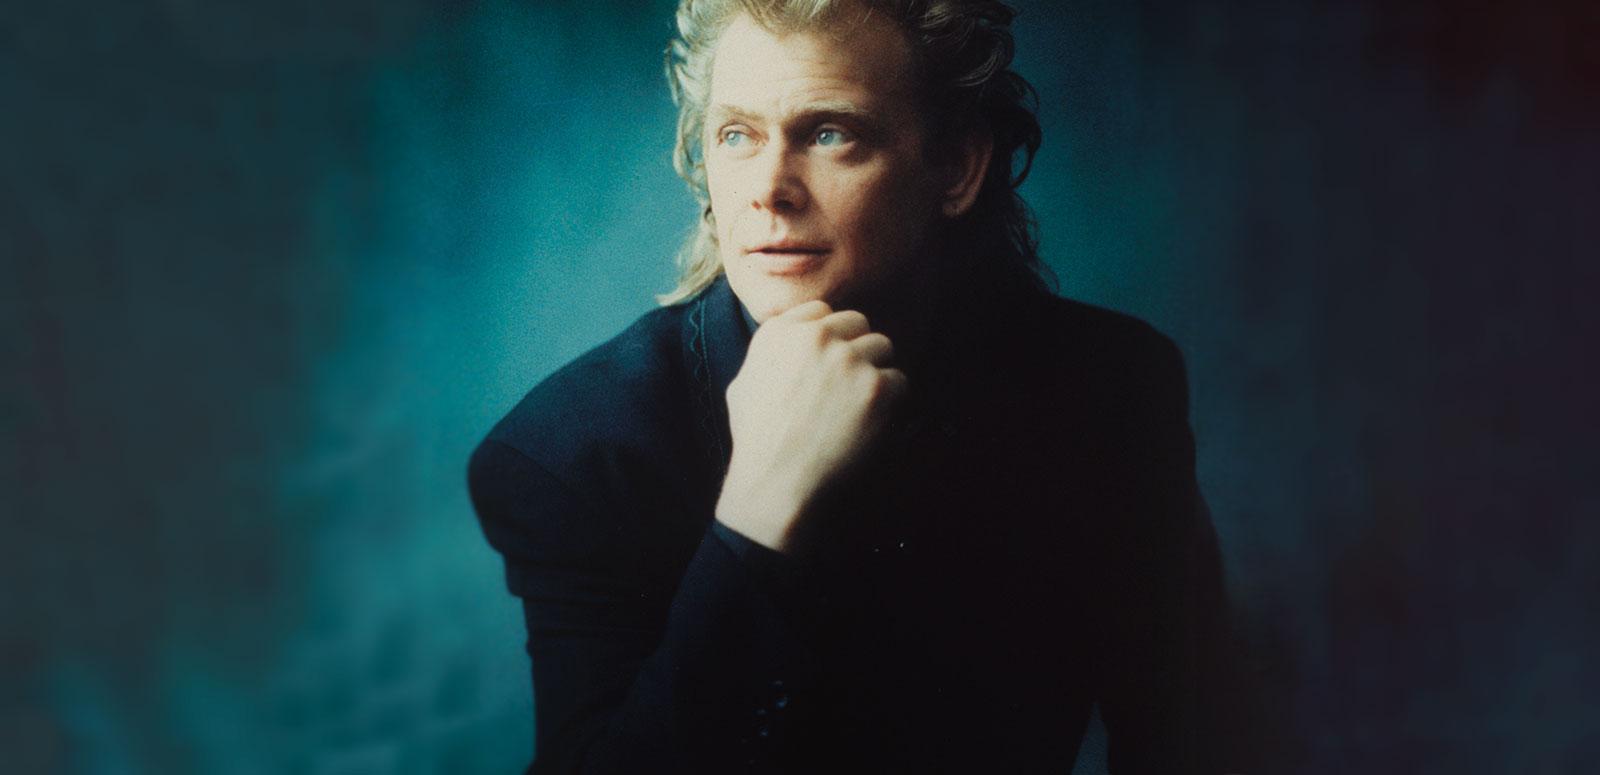 Image of John Farnham circa 1990 wearing a black jacket and seated with his chin resting in his hand.